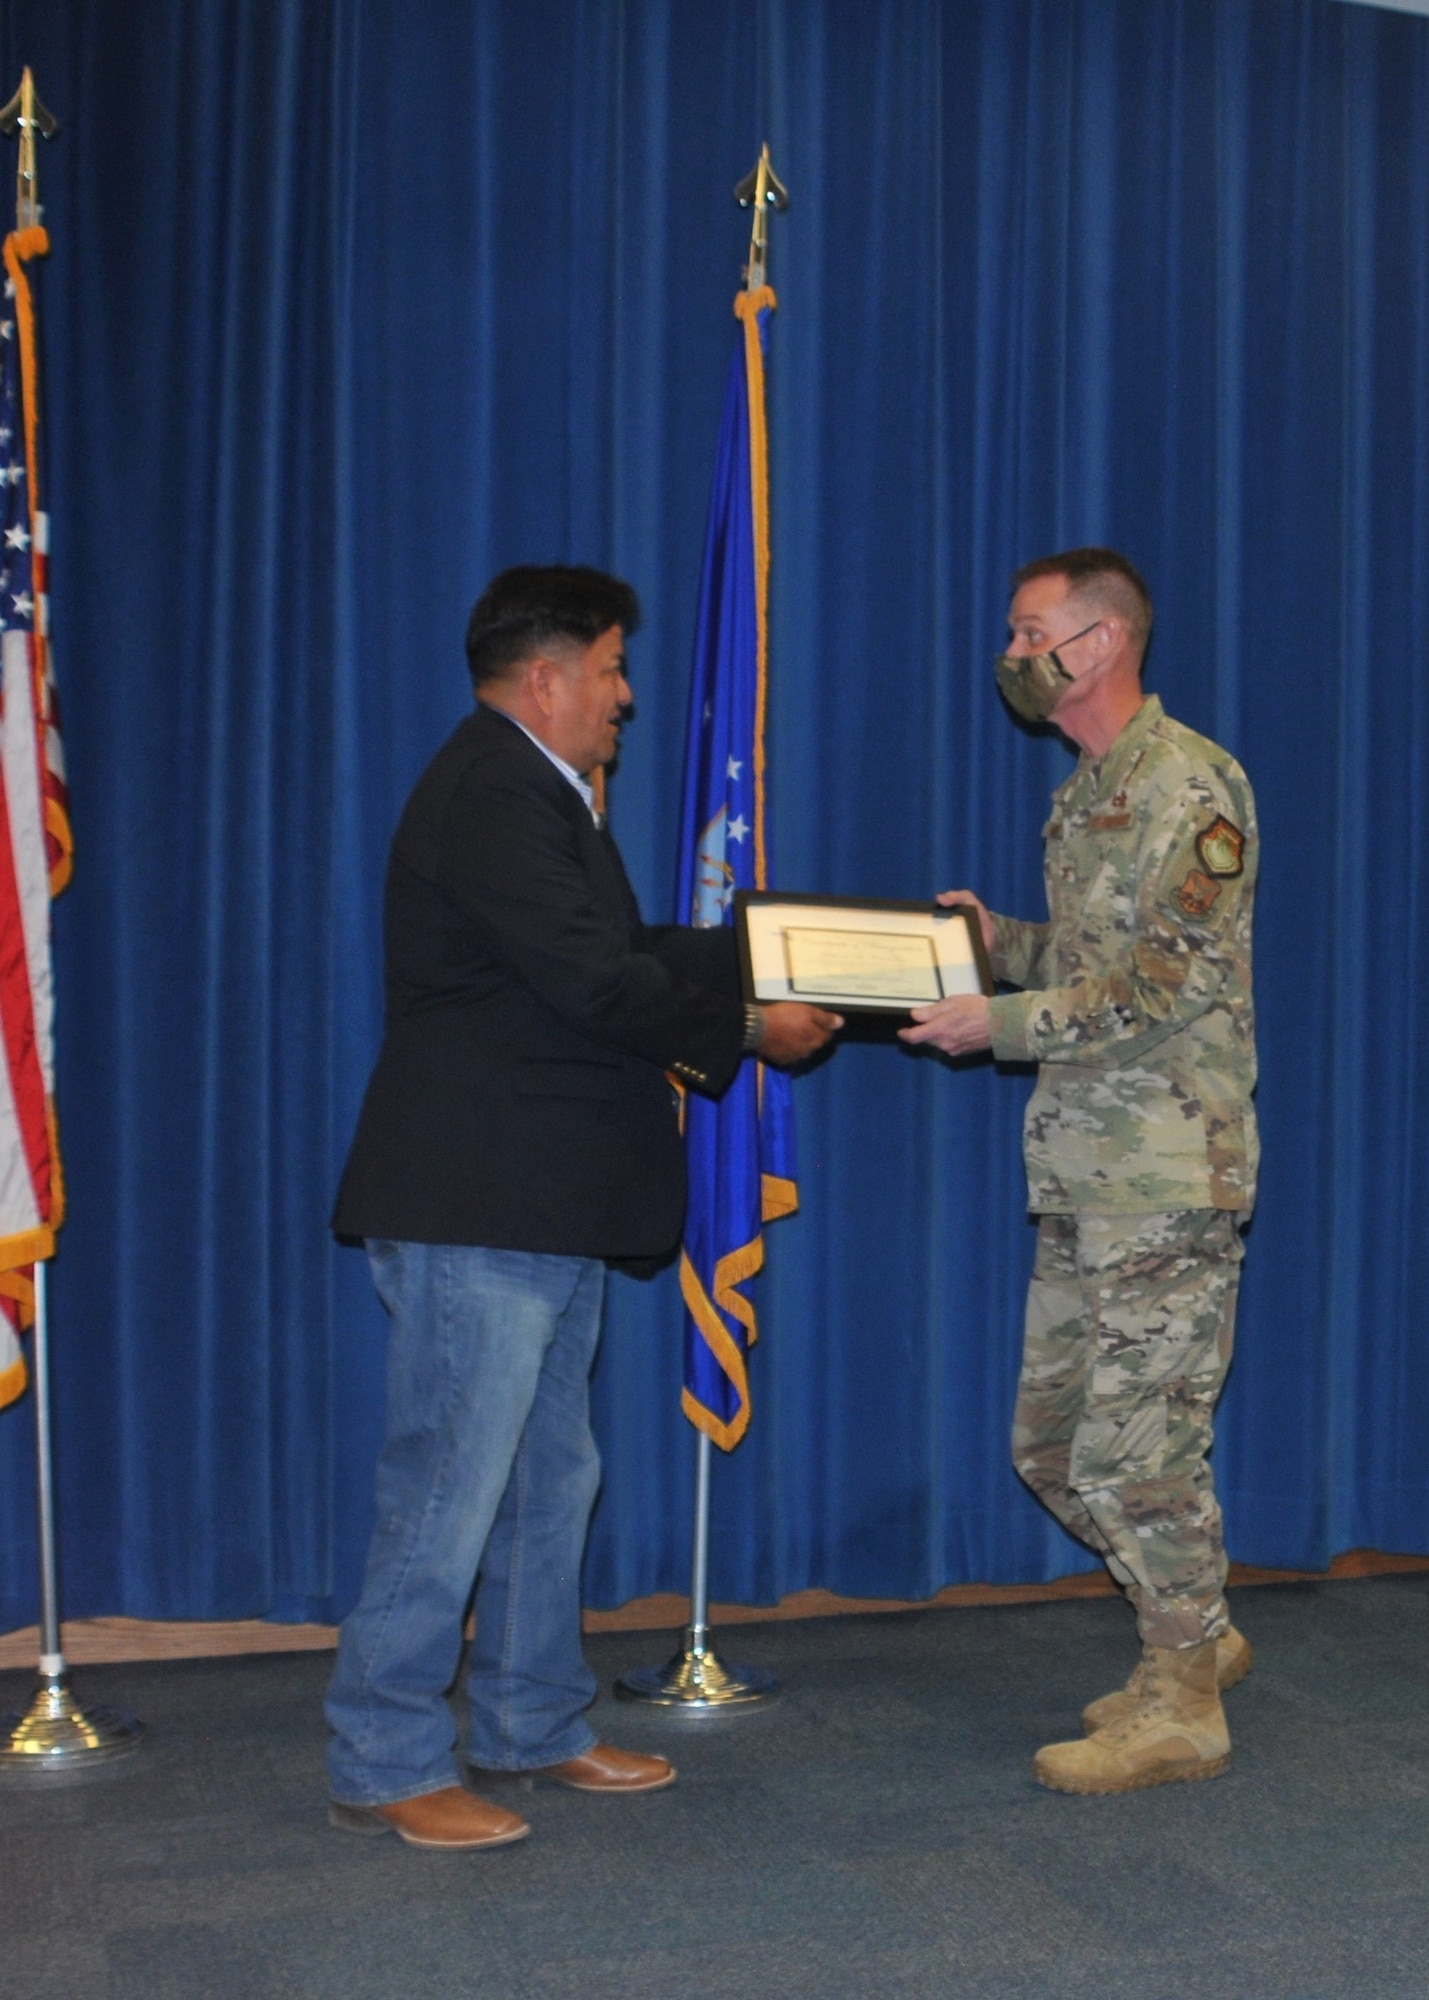 Native American man presents certificate to U.S. Air Force colonel.